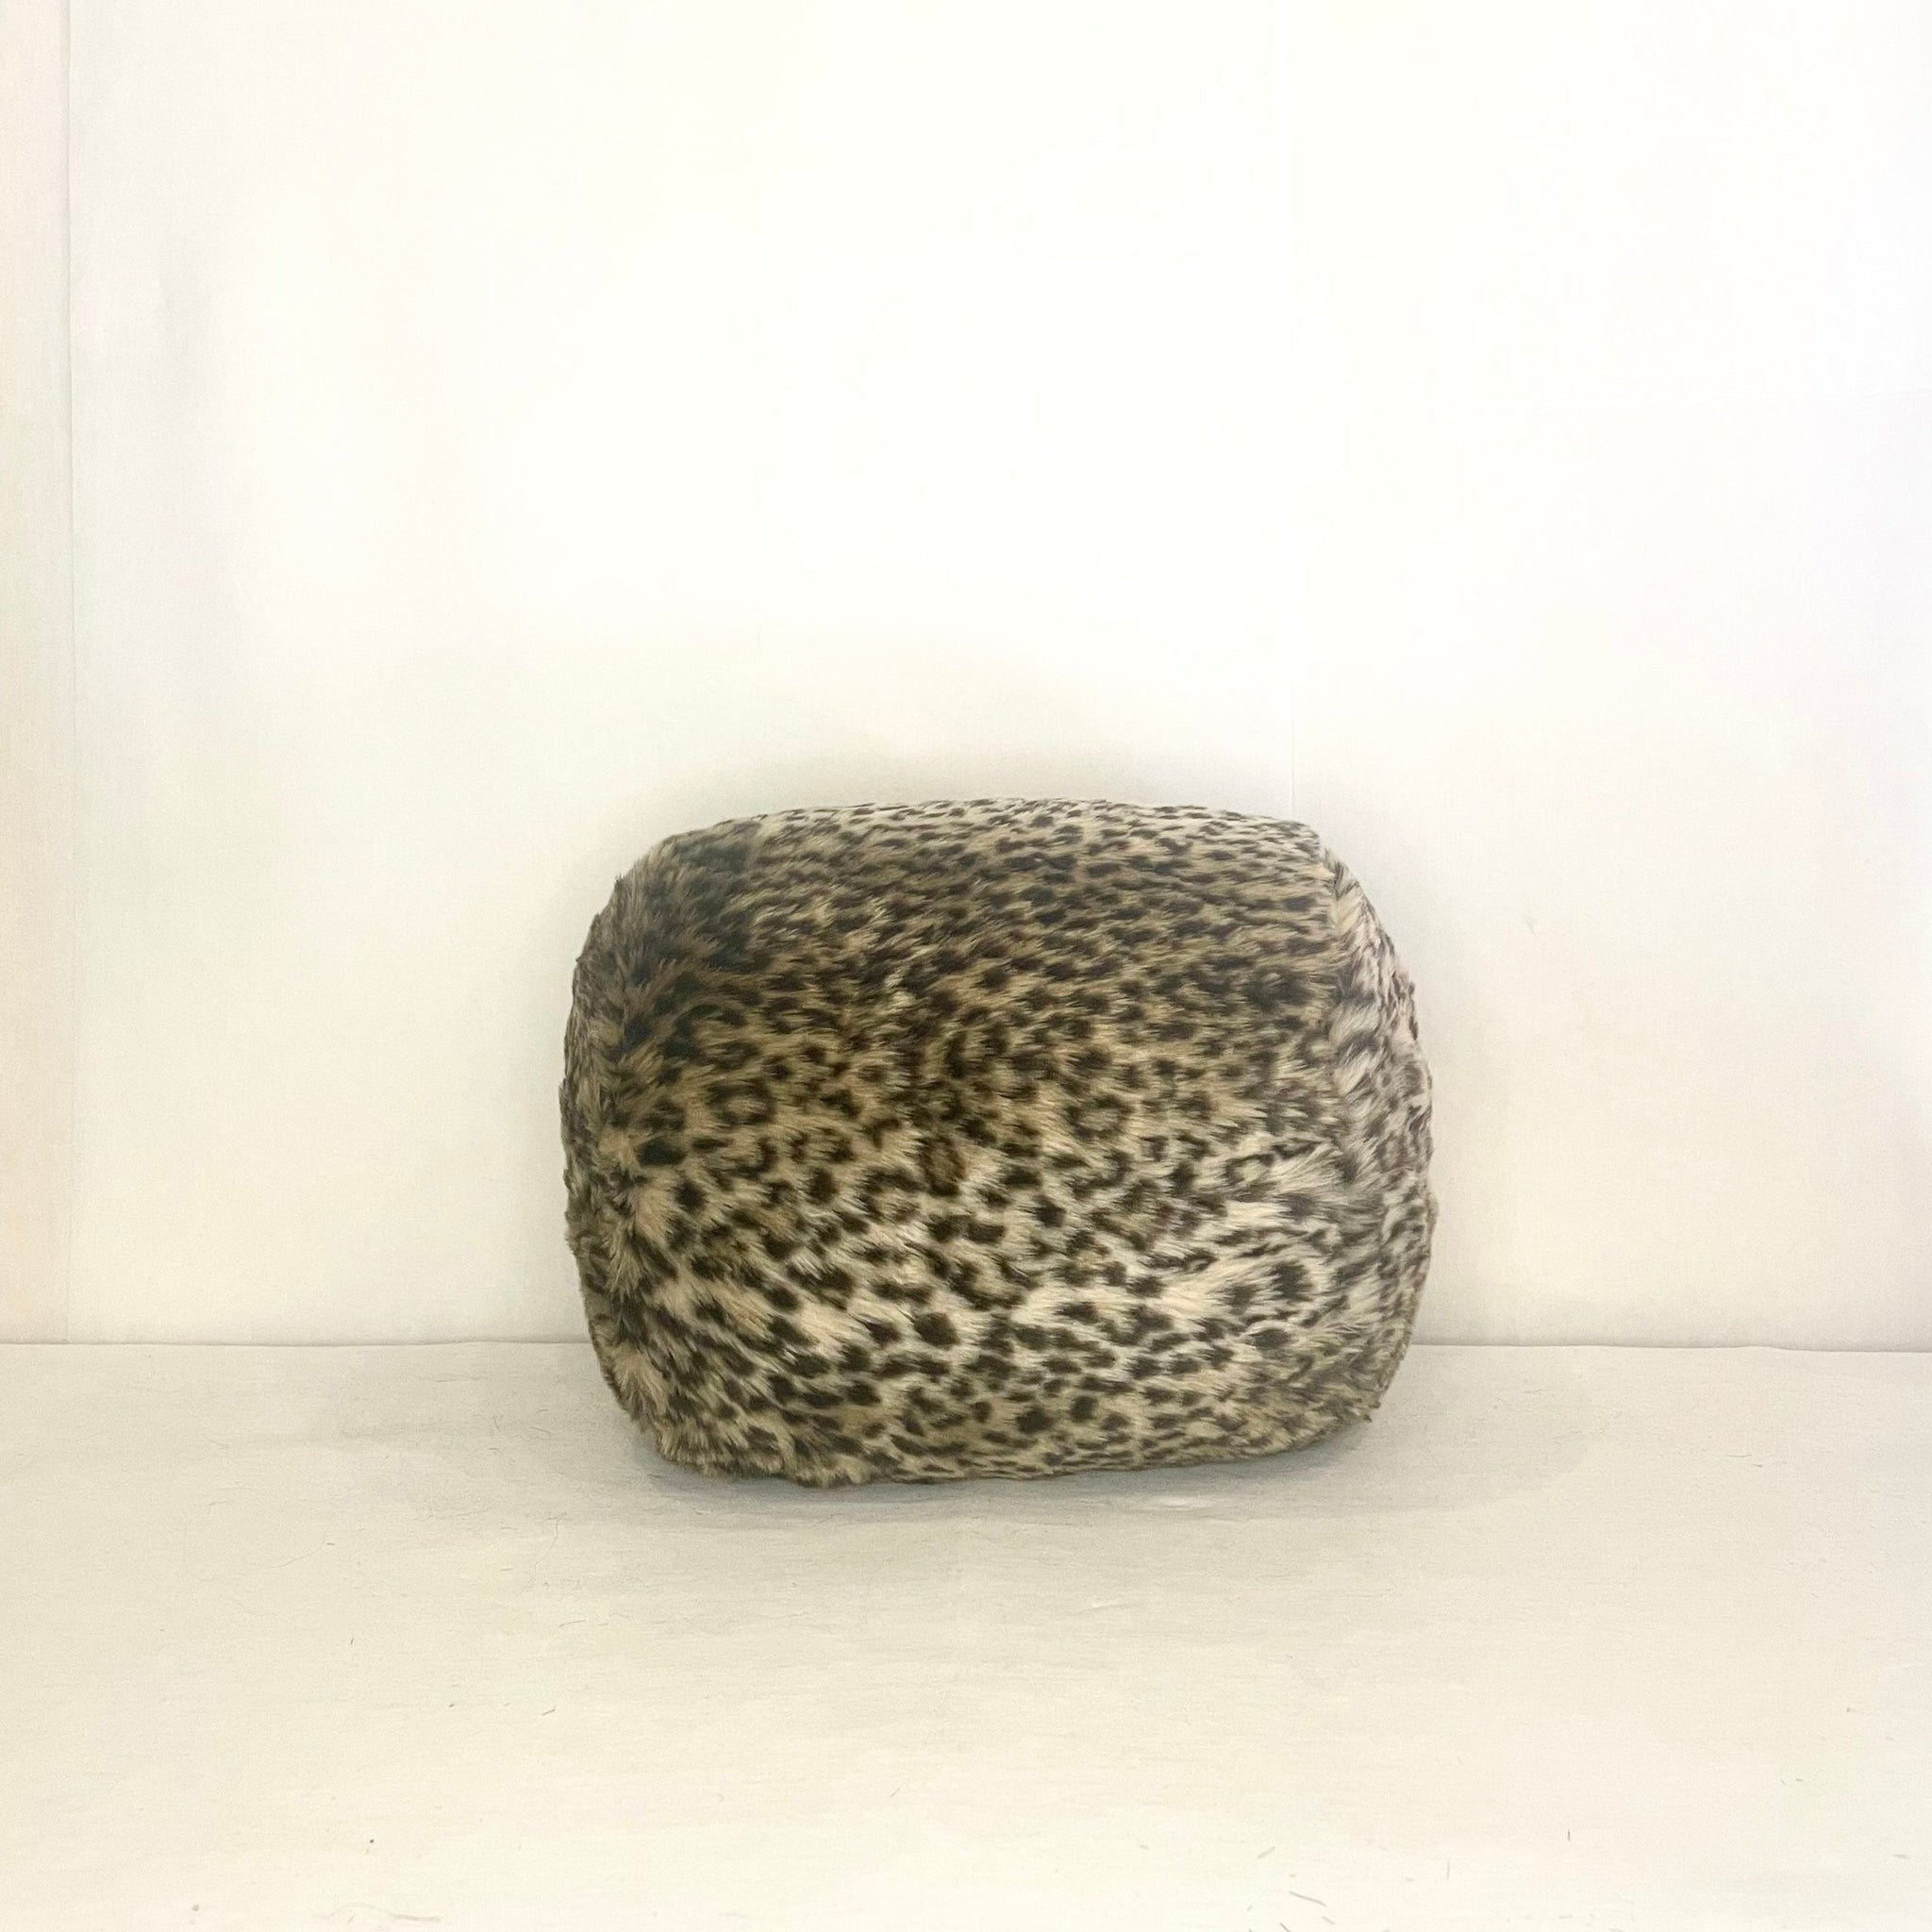 A mini bolster pillow with leopard print fabric. 